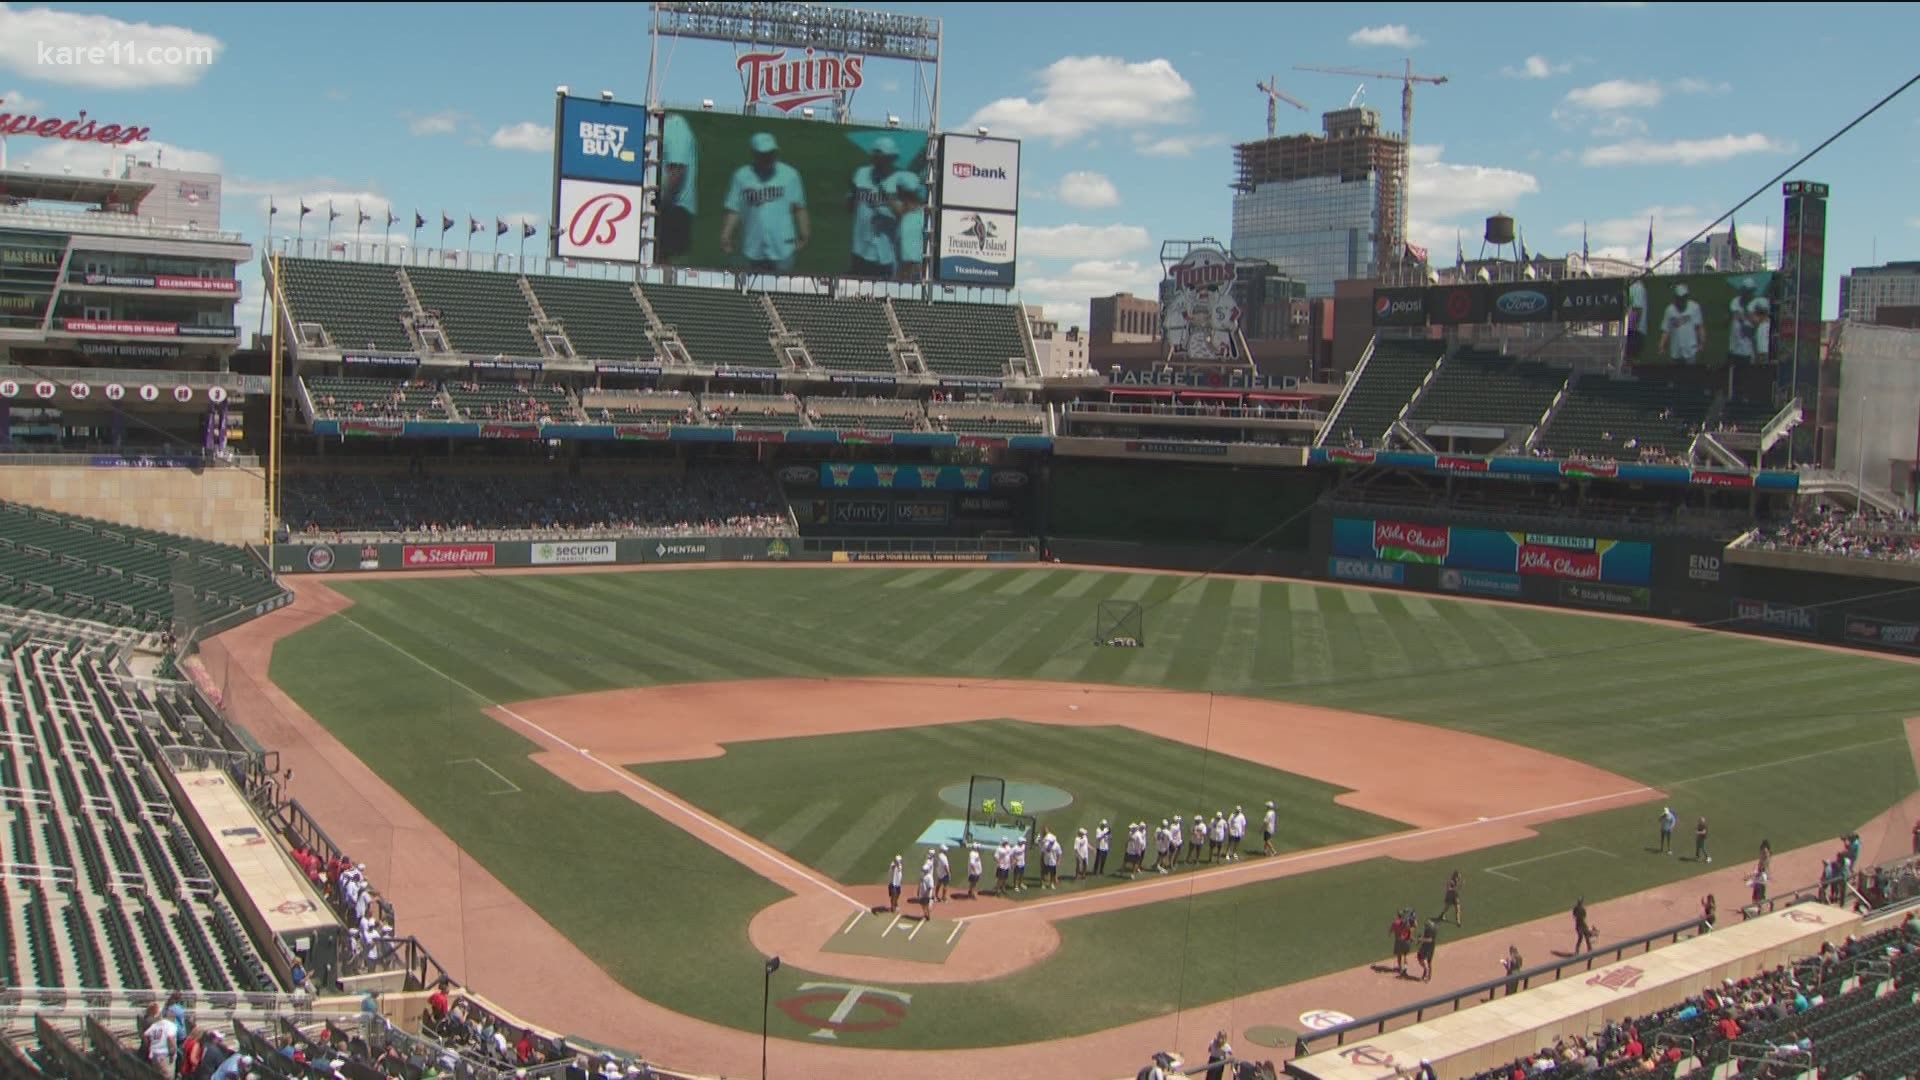 The home of the Twins will be operating at full capacity for the first time since 2019